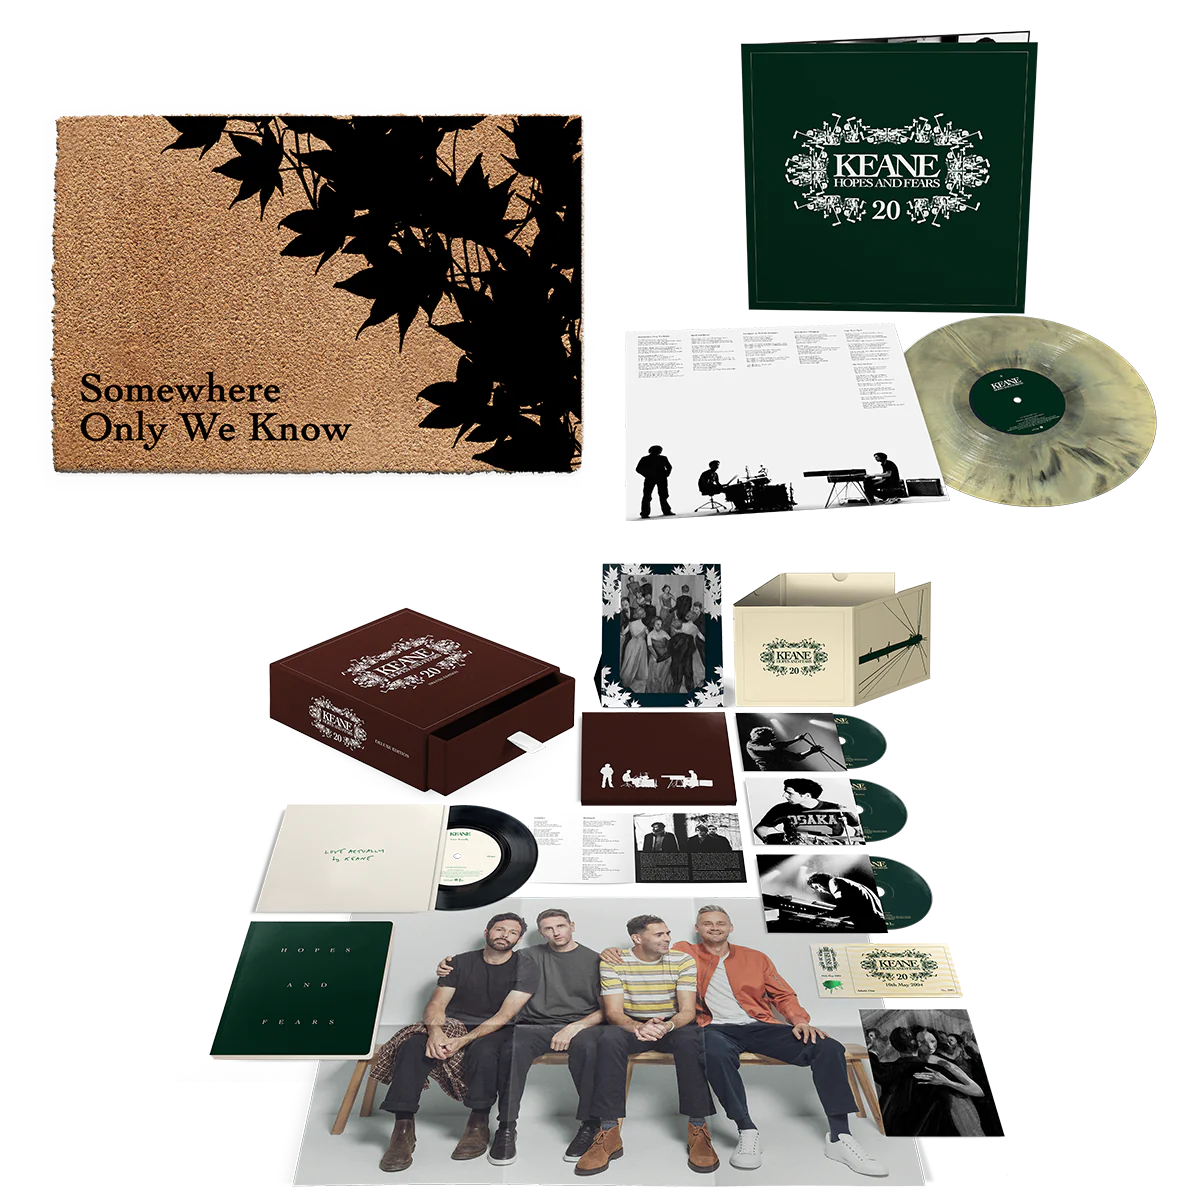 Hopes and Fears (20th Anniversary): Limited 'Galaxy Effect' Vinyl LP, Deluxe 3CD Box Set + Somewhere Only We Know Doormat